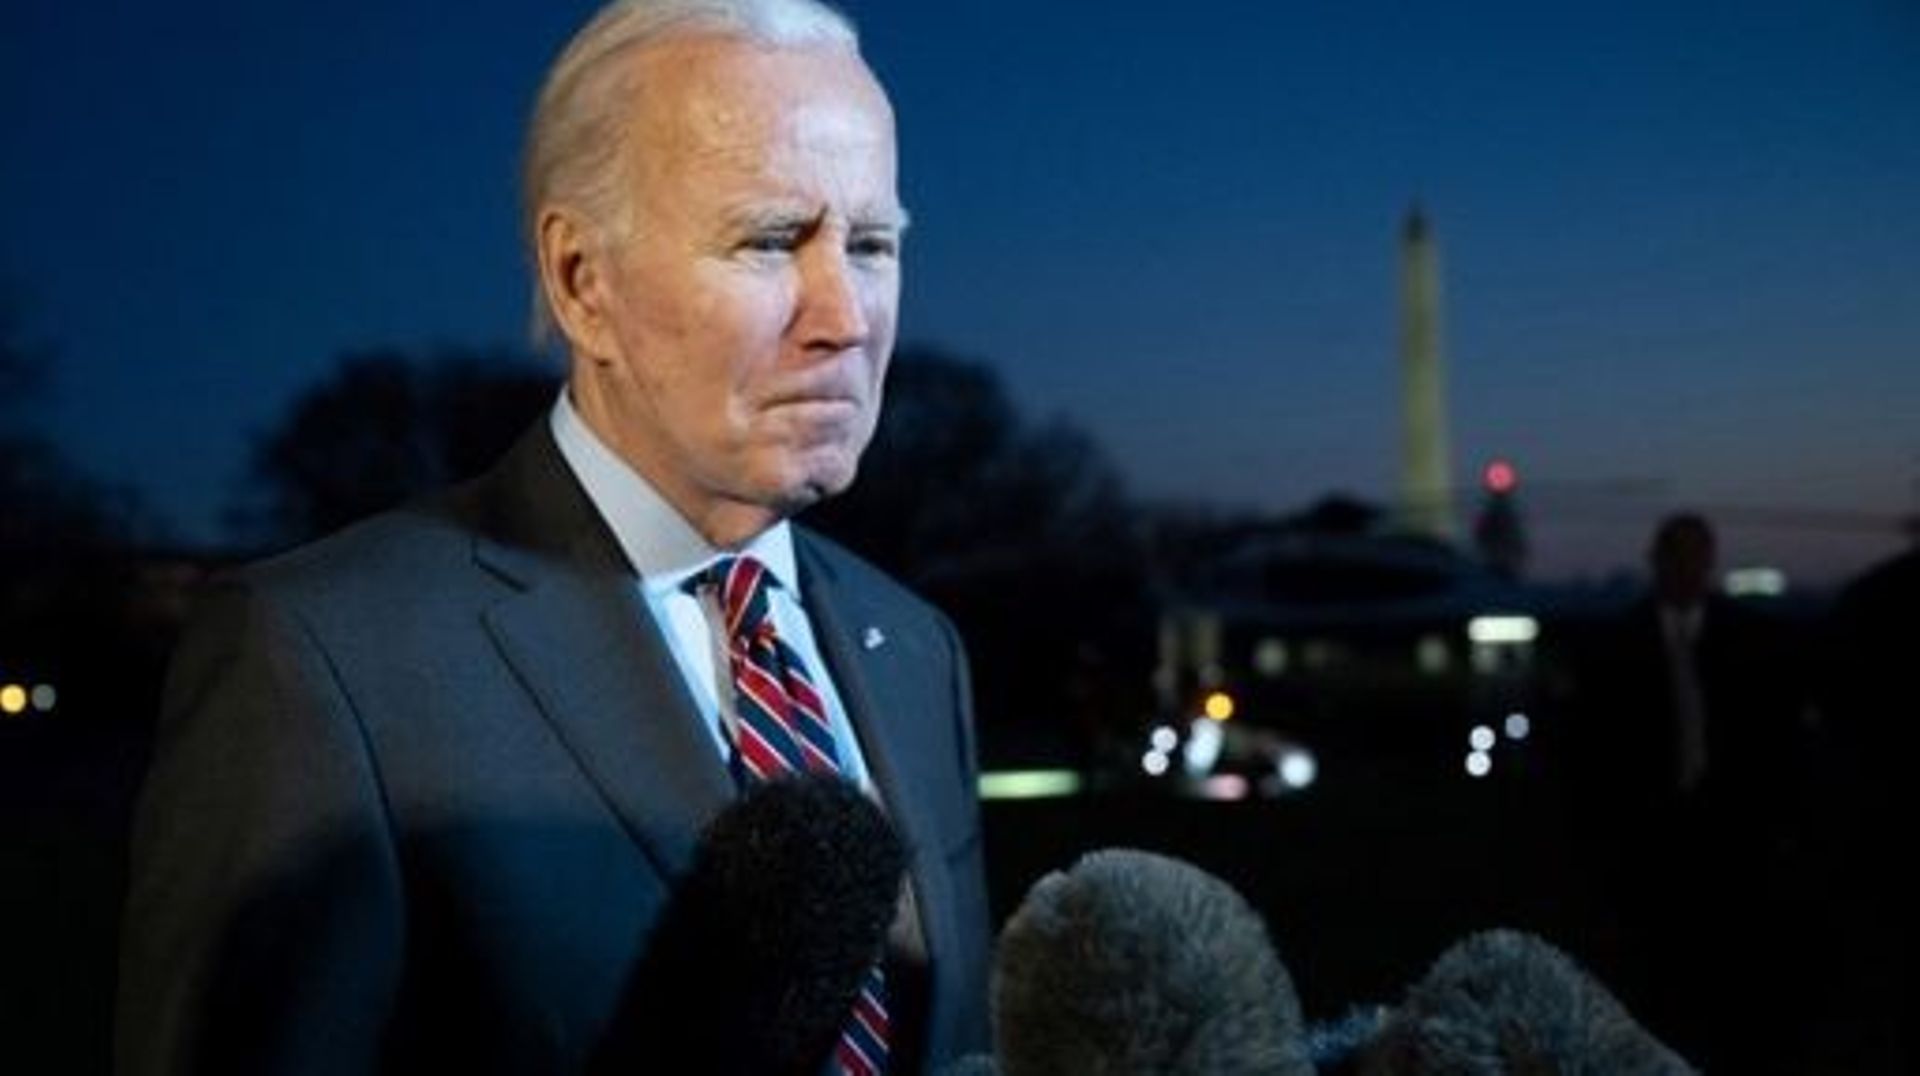 US President Joe Biden speaks to the media about Tyre Nichols as he walks to Marine One prior to departure from the South Lawn of the White House in Washington, DC, January 27, 2023, as he heads to Camp David for the weekend. Police officers,were charged 